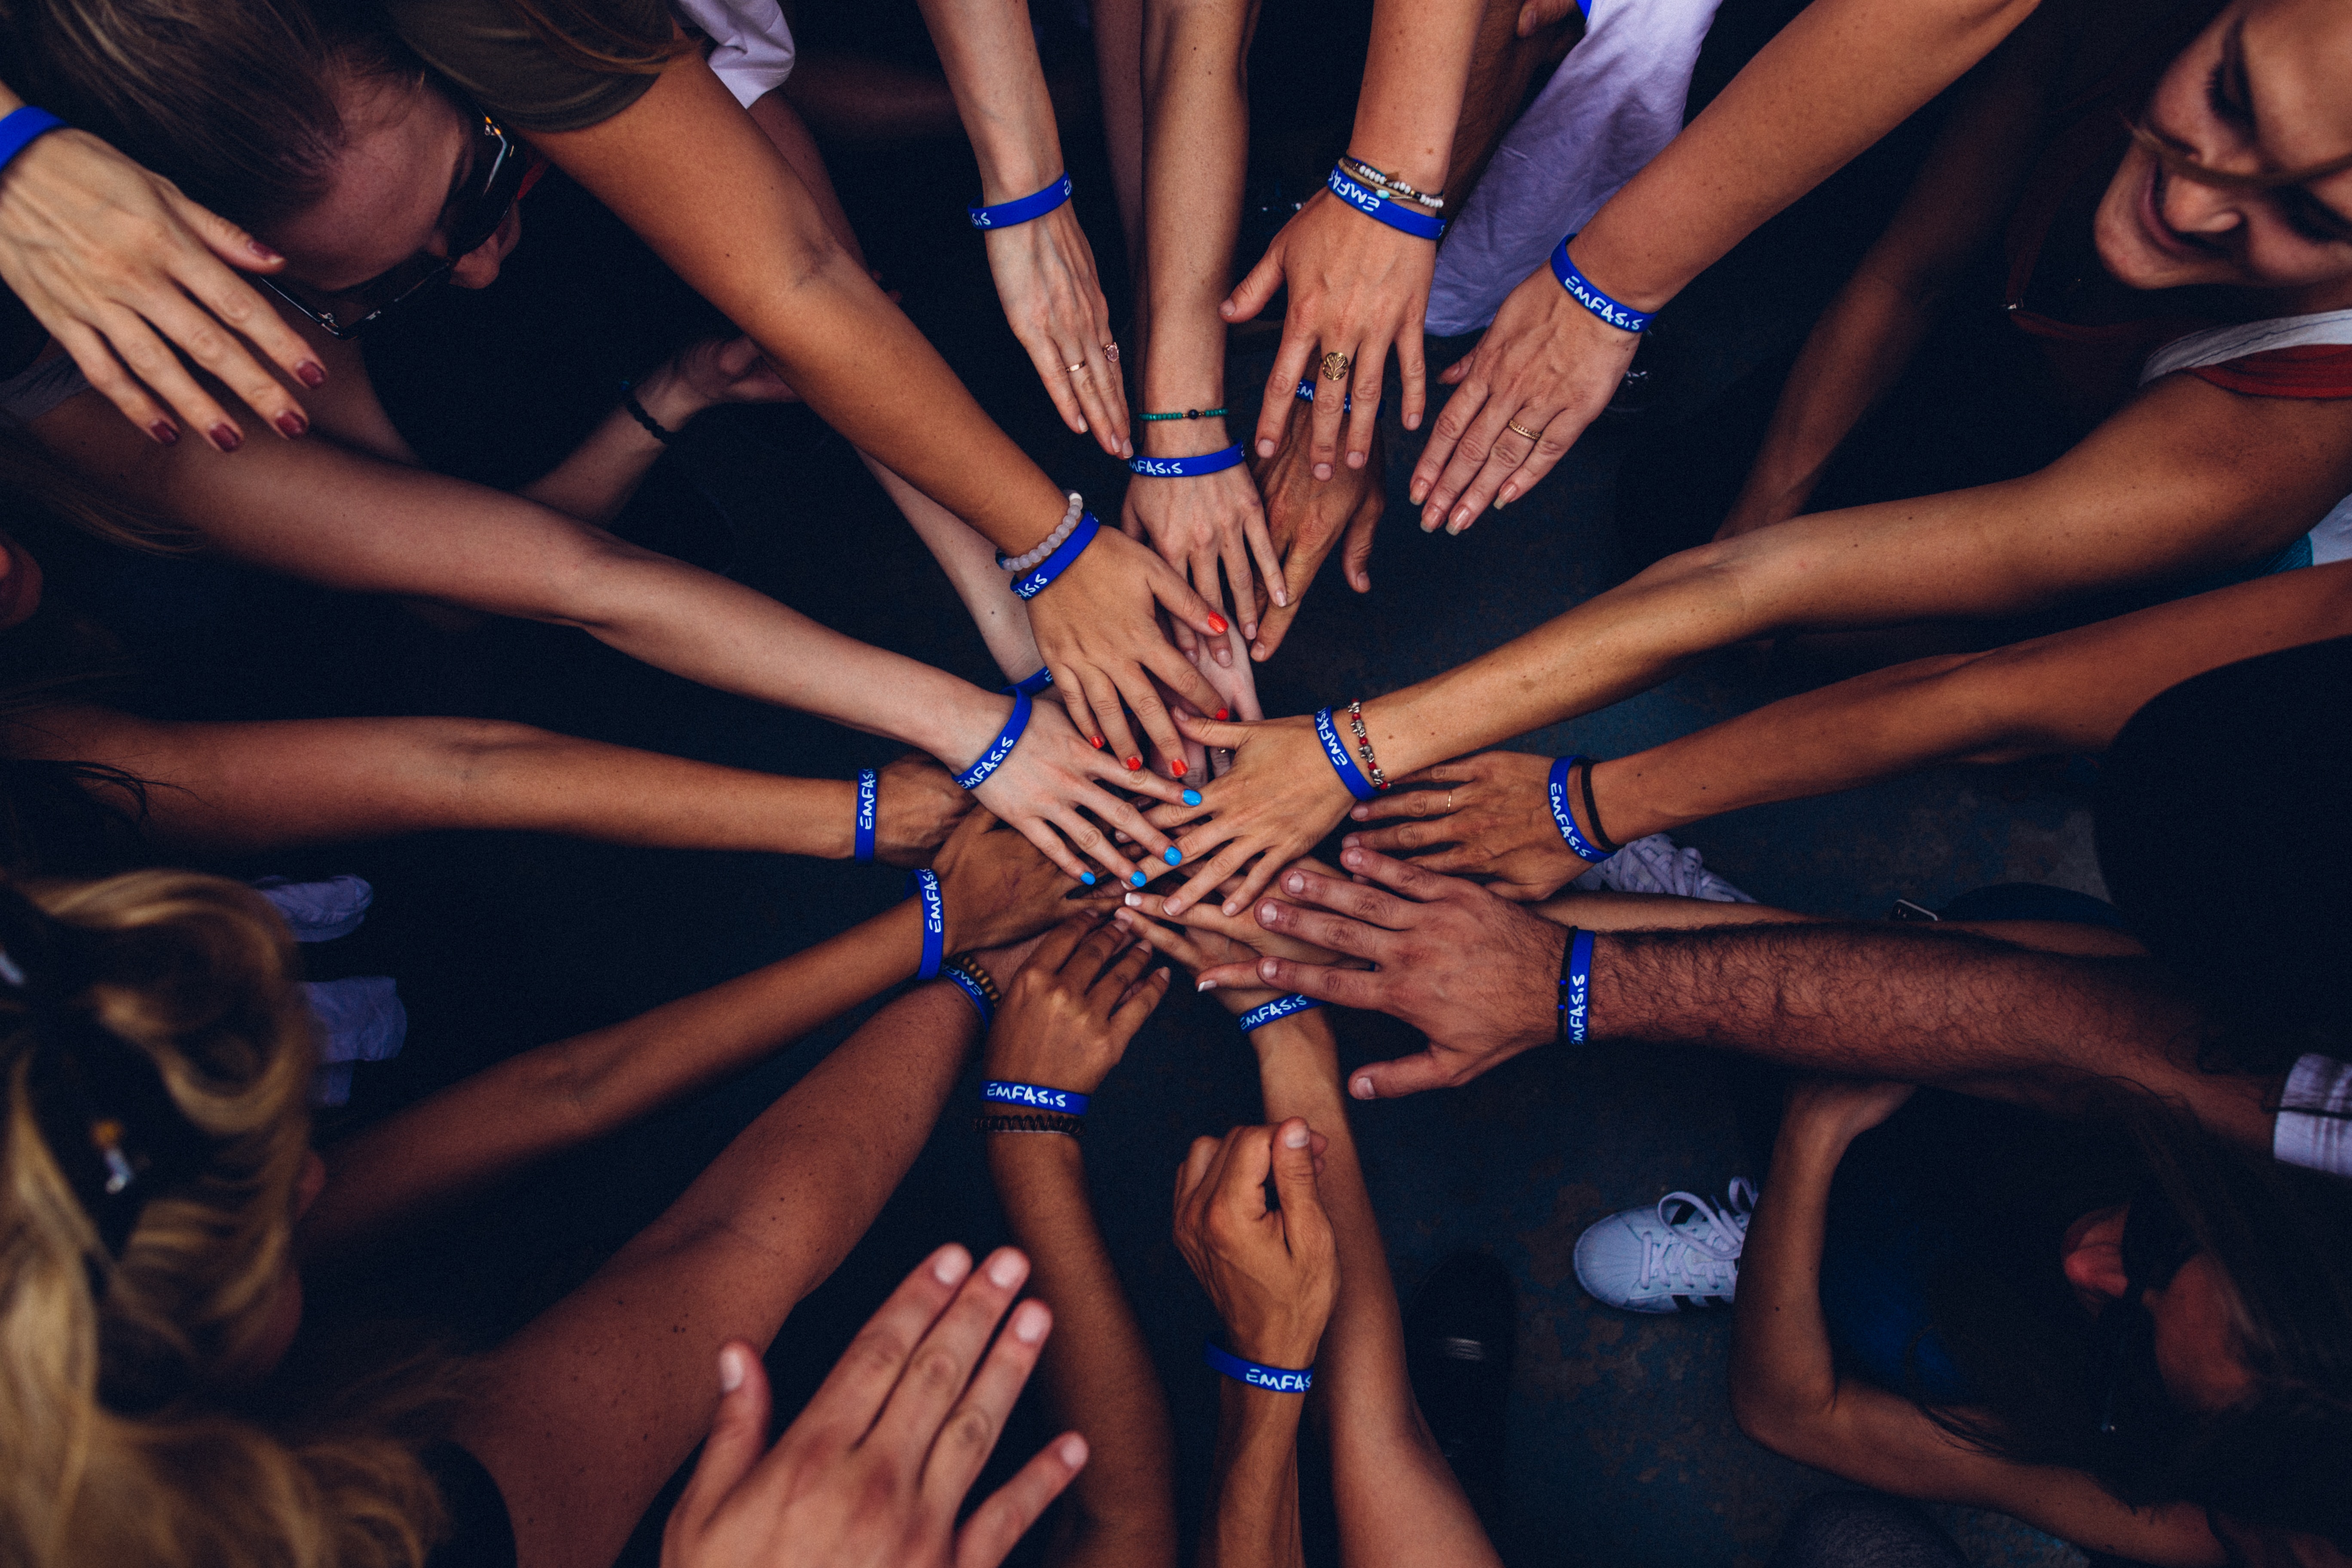 Neon One Orgs Raise $36M+ on GivingTuesday 2019